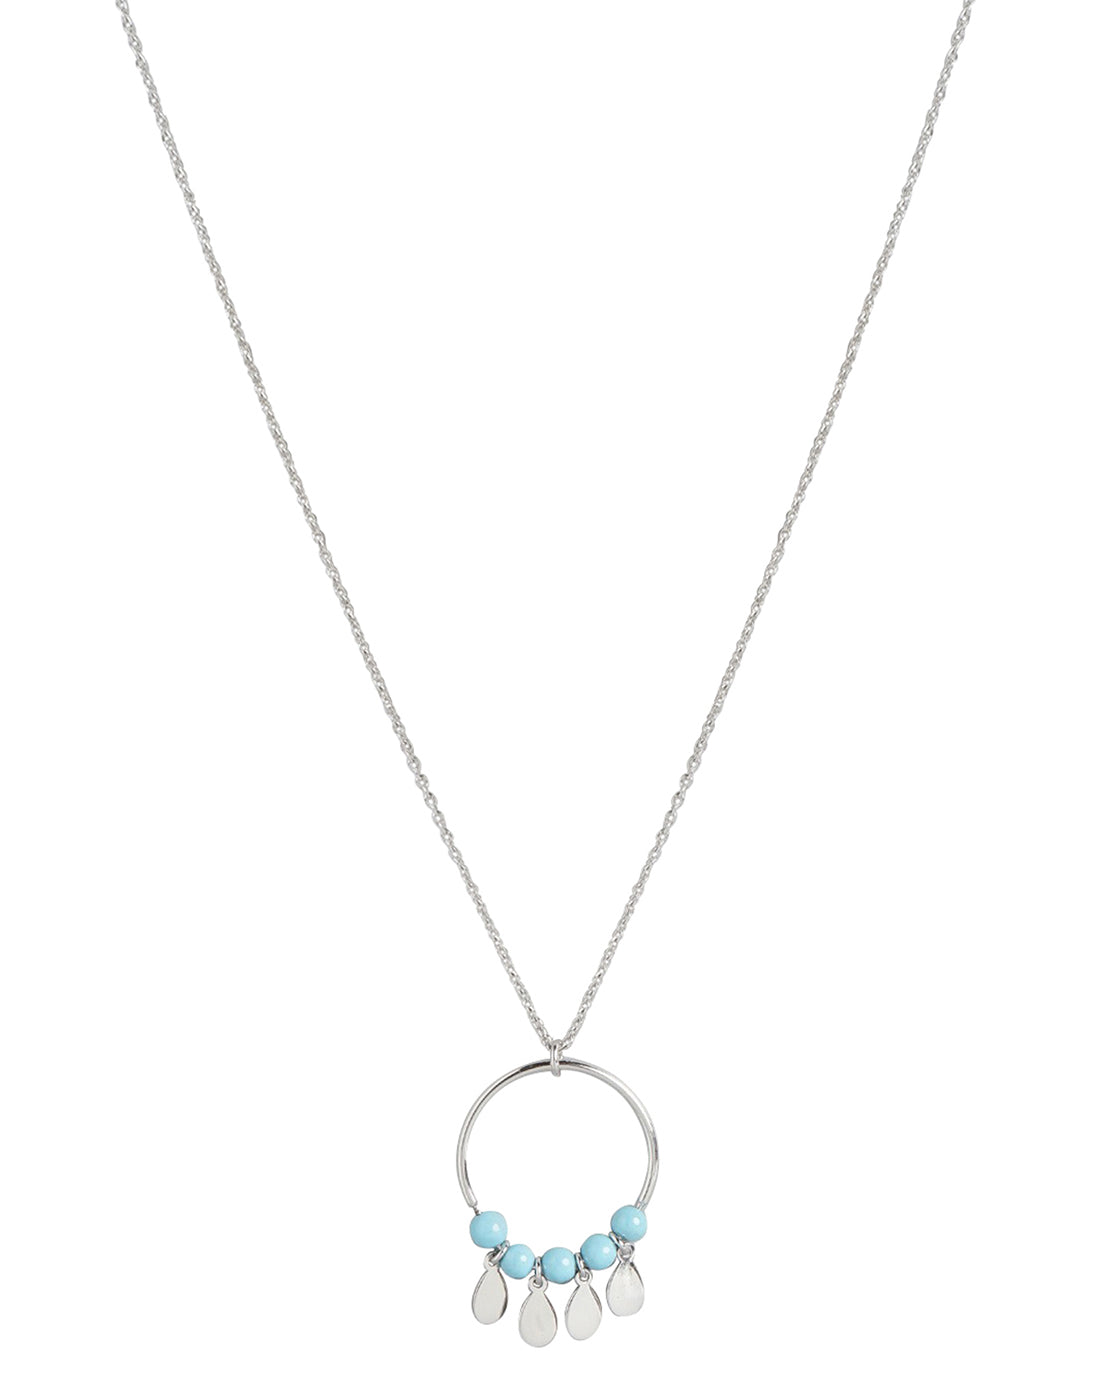 925 Sterling Silver Circle With Turquoise Bead And Dangling Drops Pendant With Chain &amp; Rhodium Plating